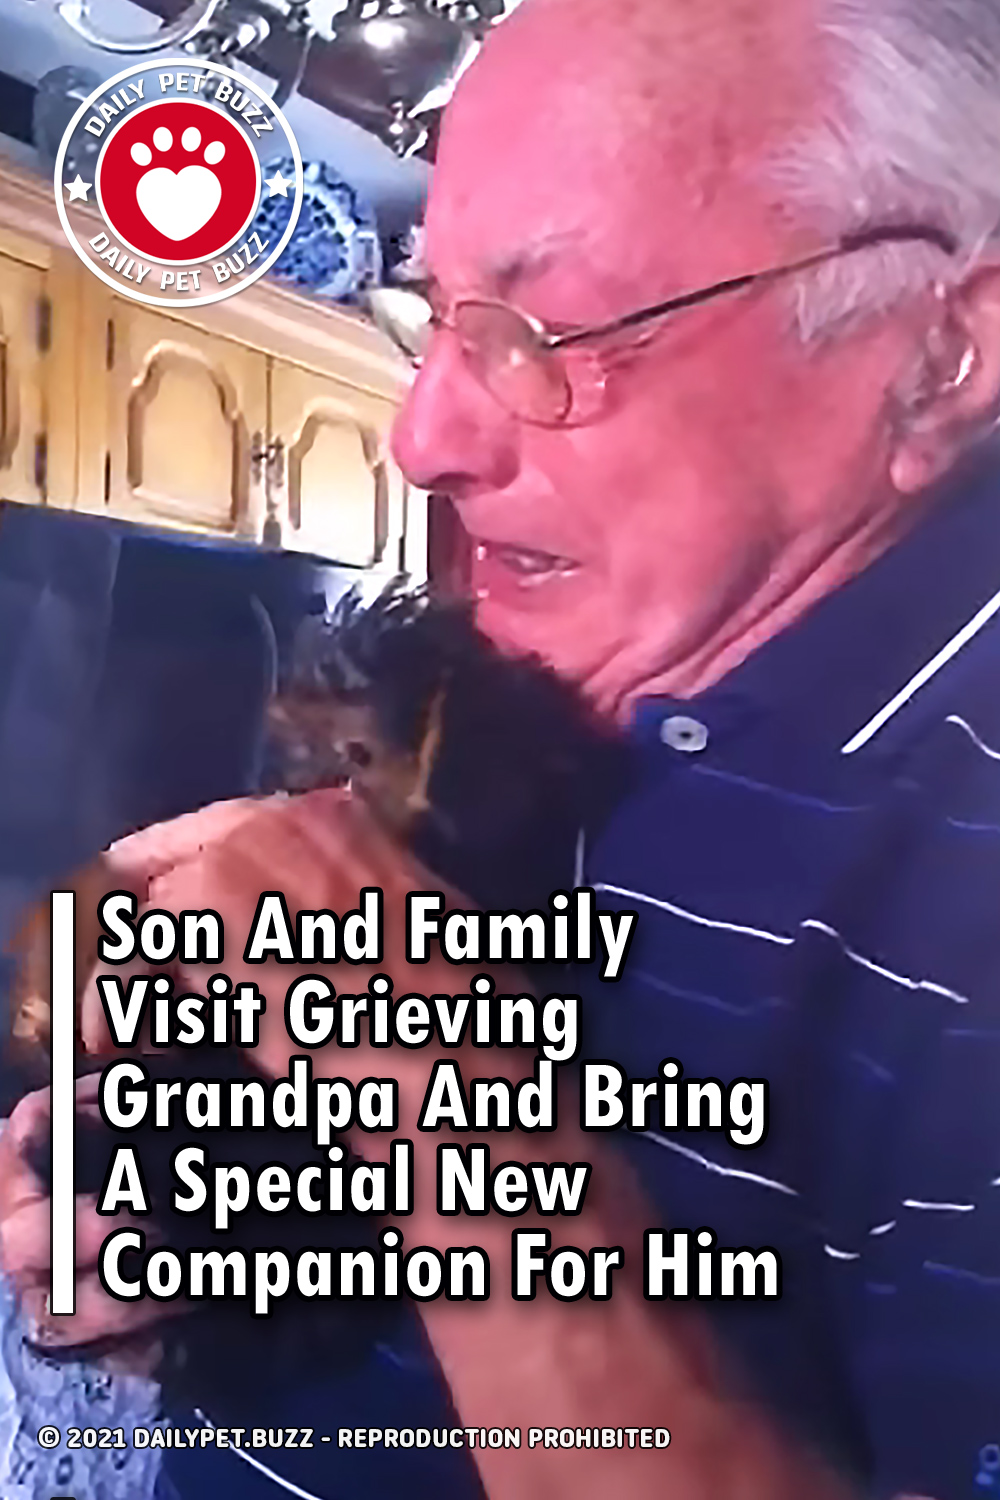 Son And Family Visit Grieving Grandpa And Bring A Special New Companion For Him